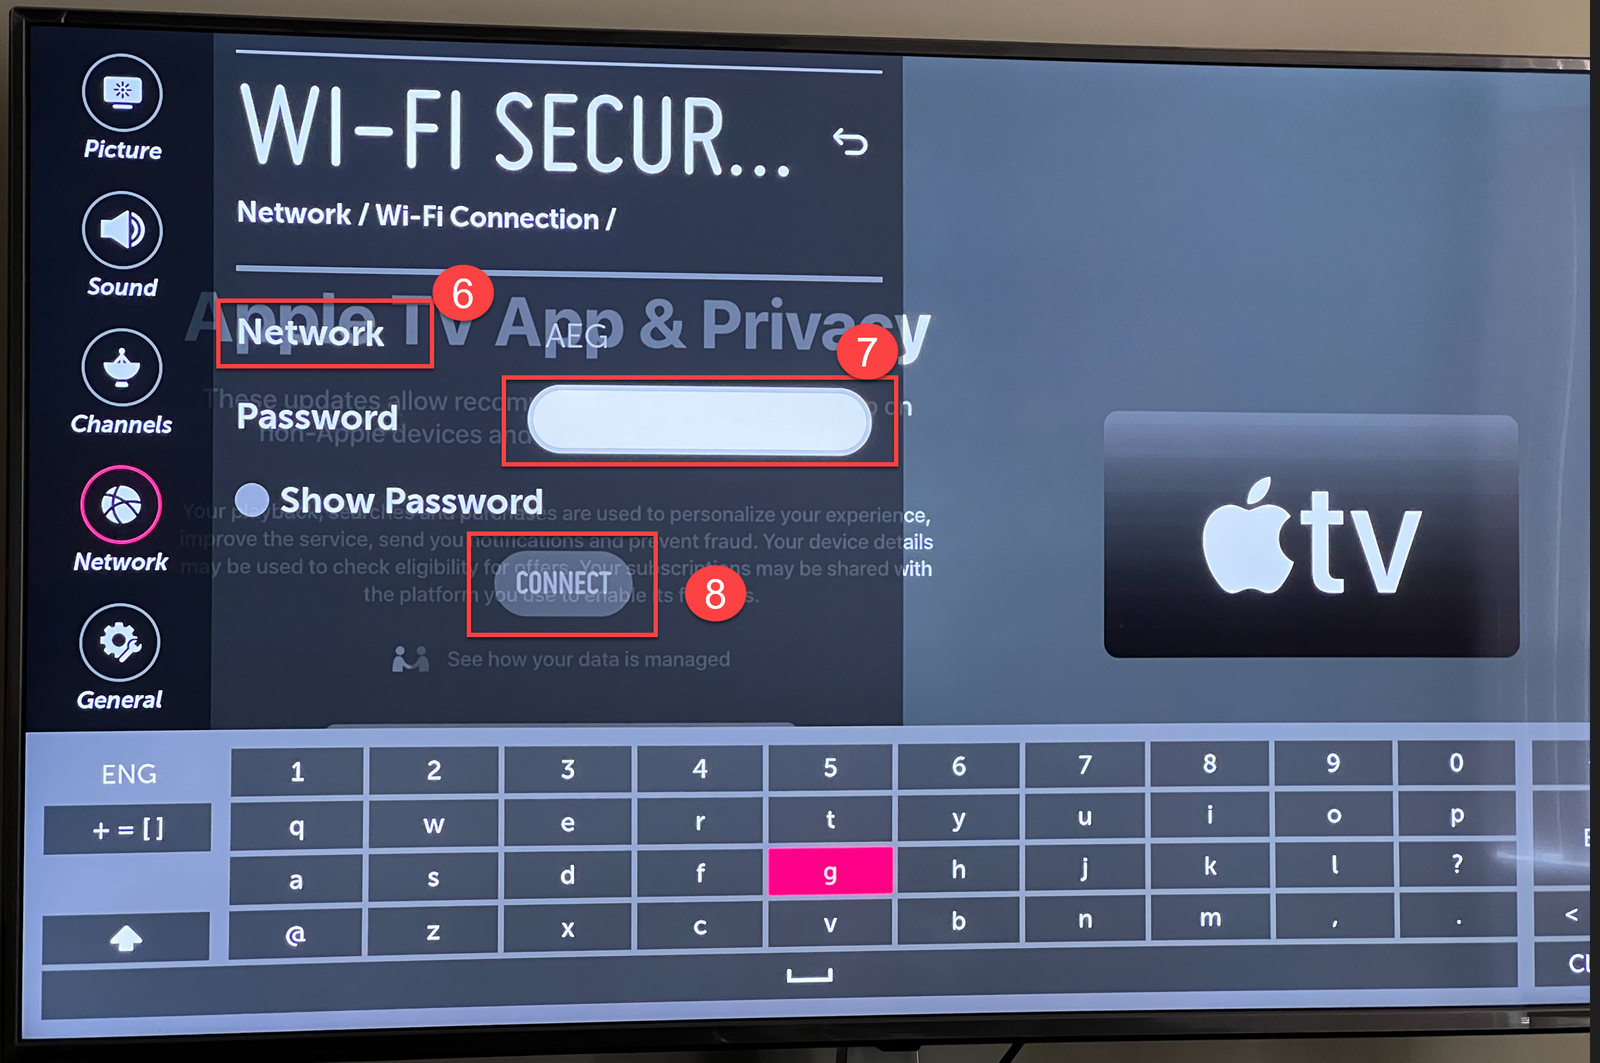 Add WIFI password and connect on LG TV screen